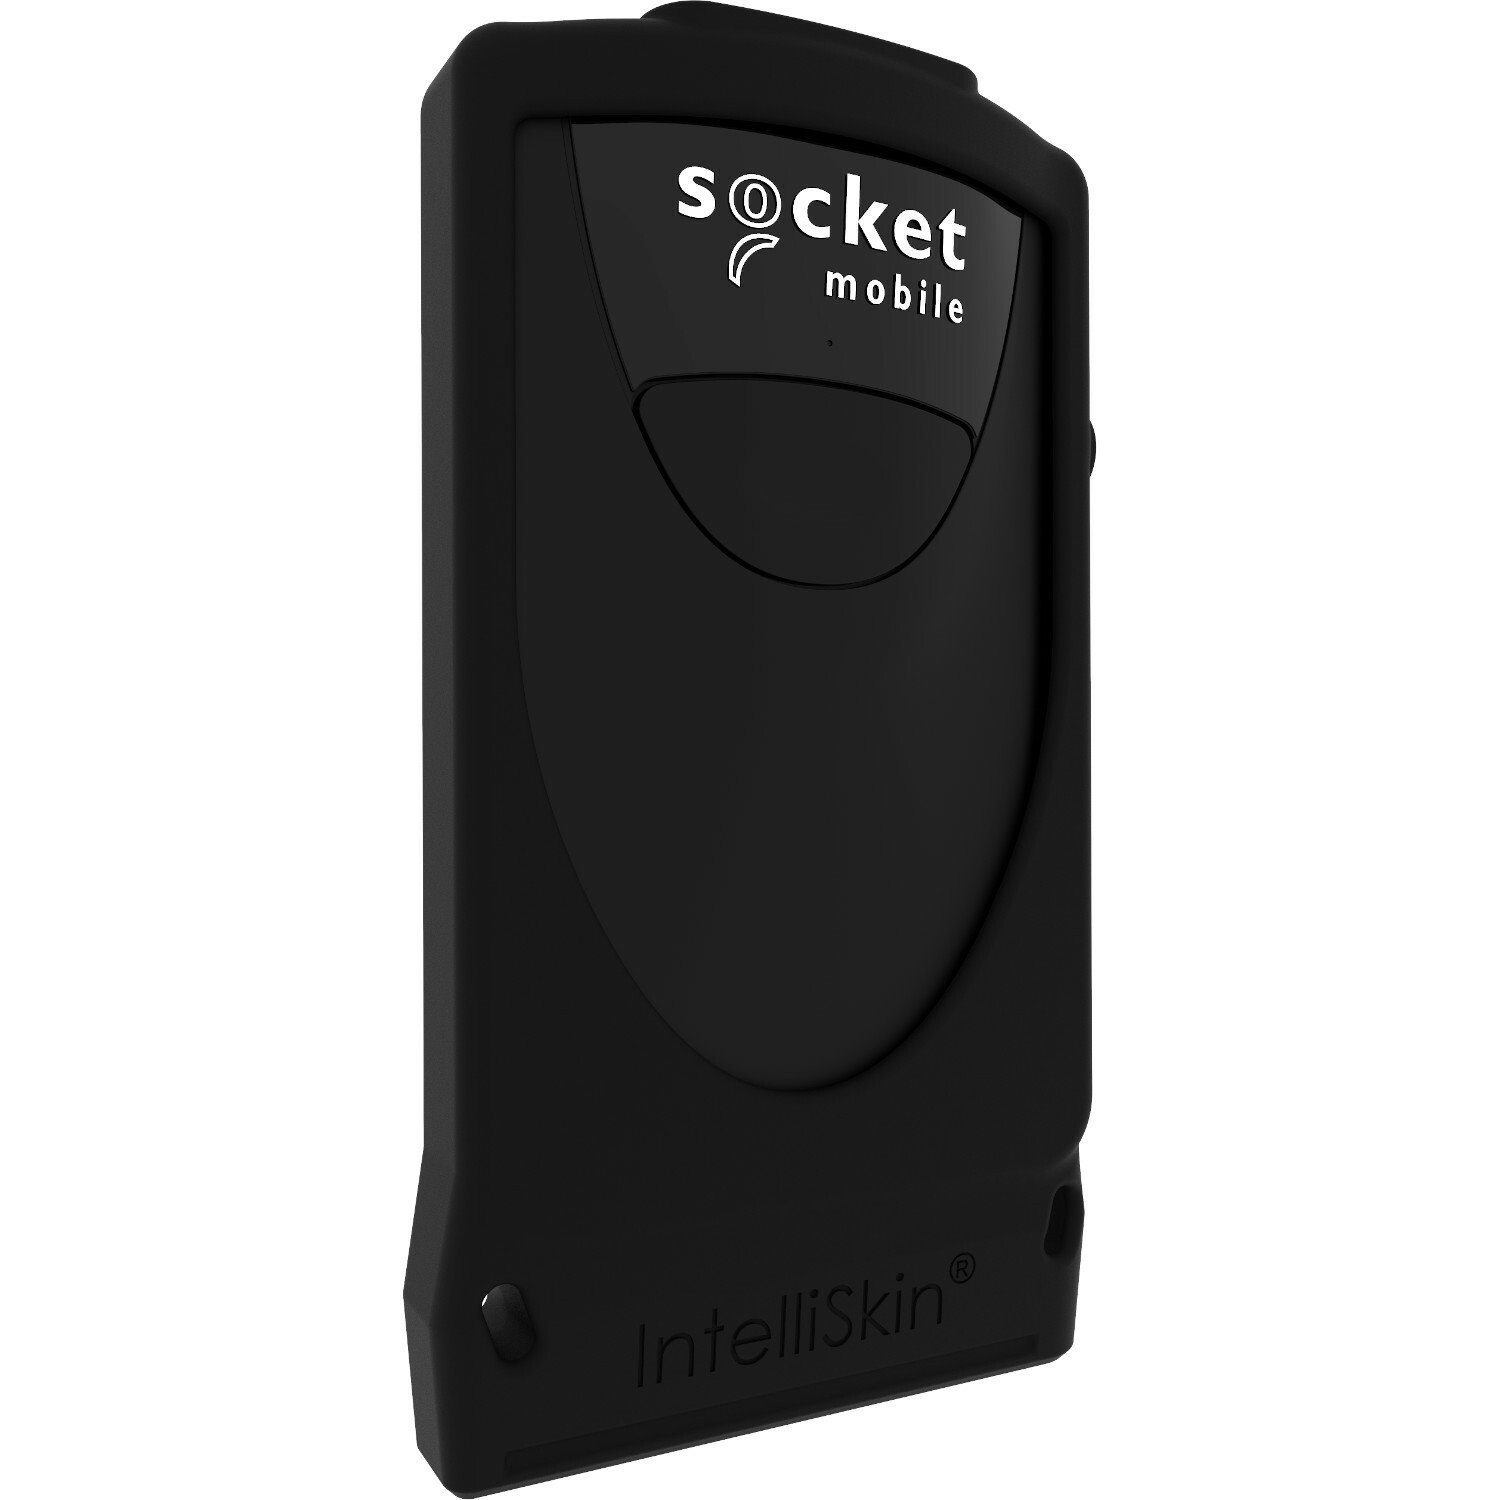 Socket Mobile DuraScan D820 Retail, Hospitality, Logistics, Inventory, Transportation, Warehouse, Field Sales/Service Barcode Scanner - Wireless Connectivity